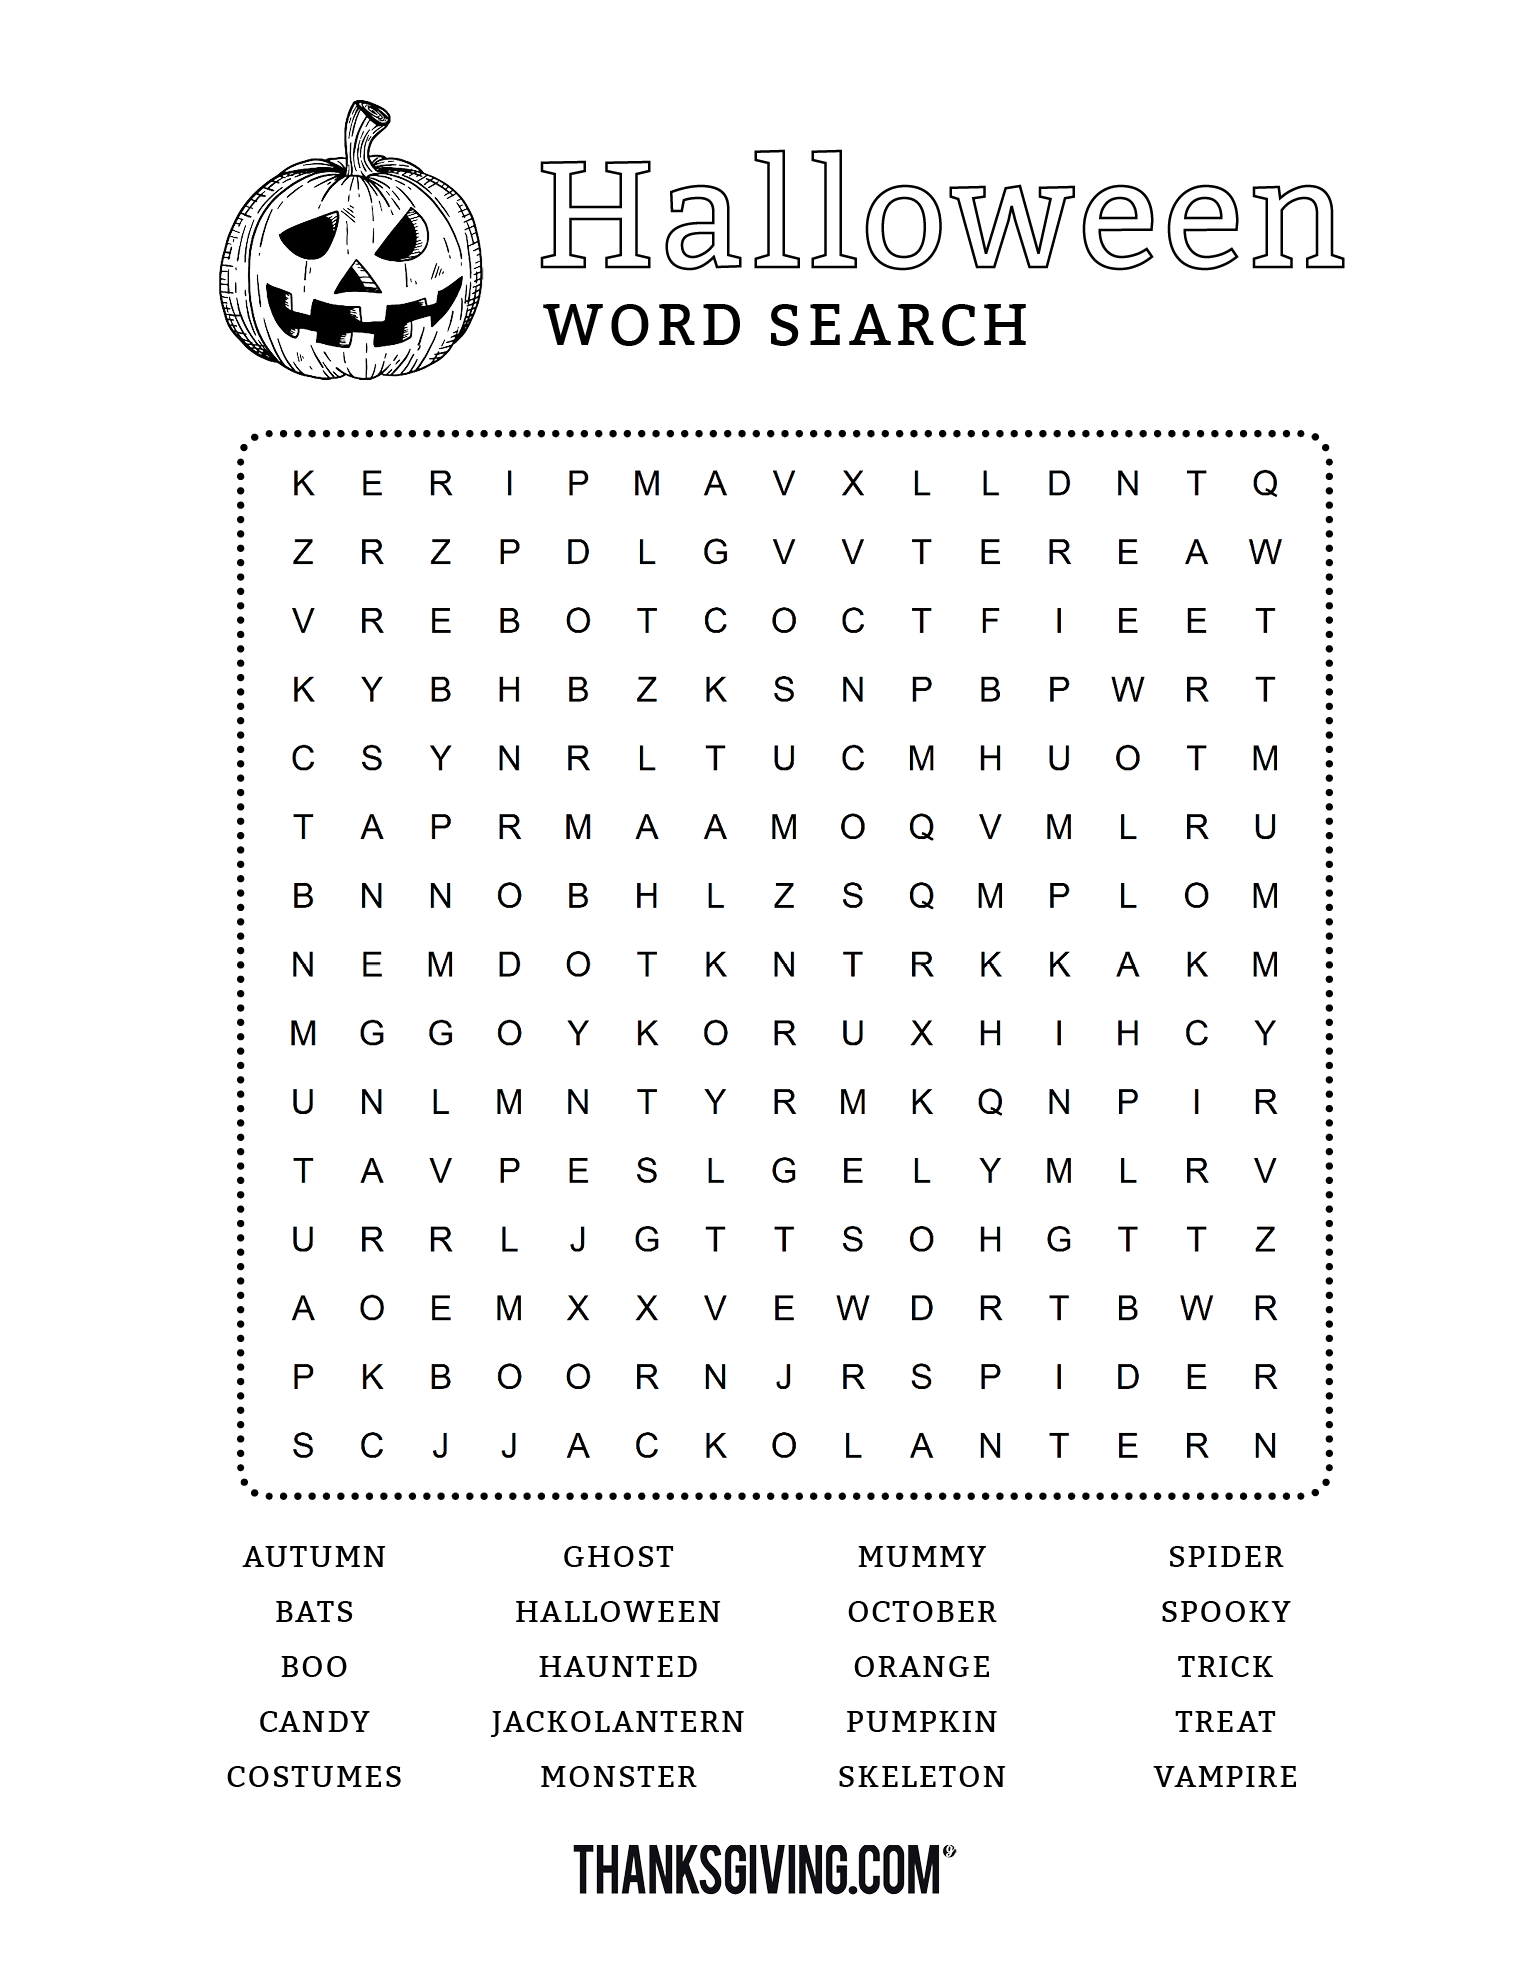 free-word-search-printable-halloween-word-search-printable-free-for-kids-and-adults